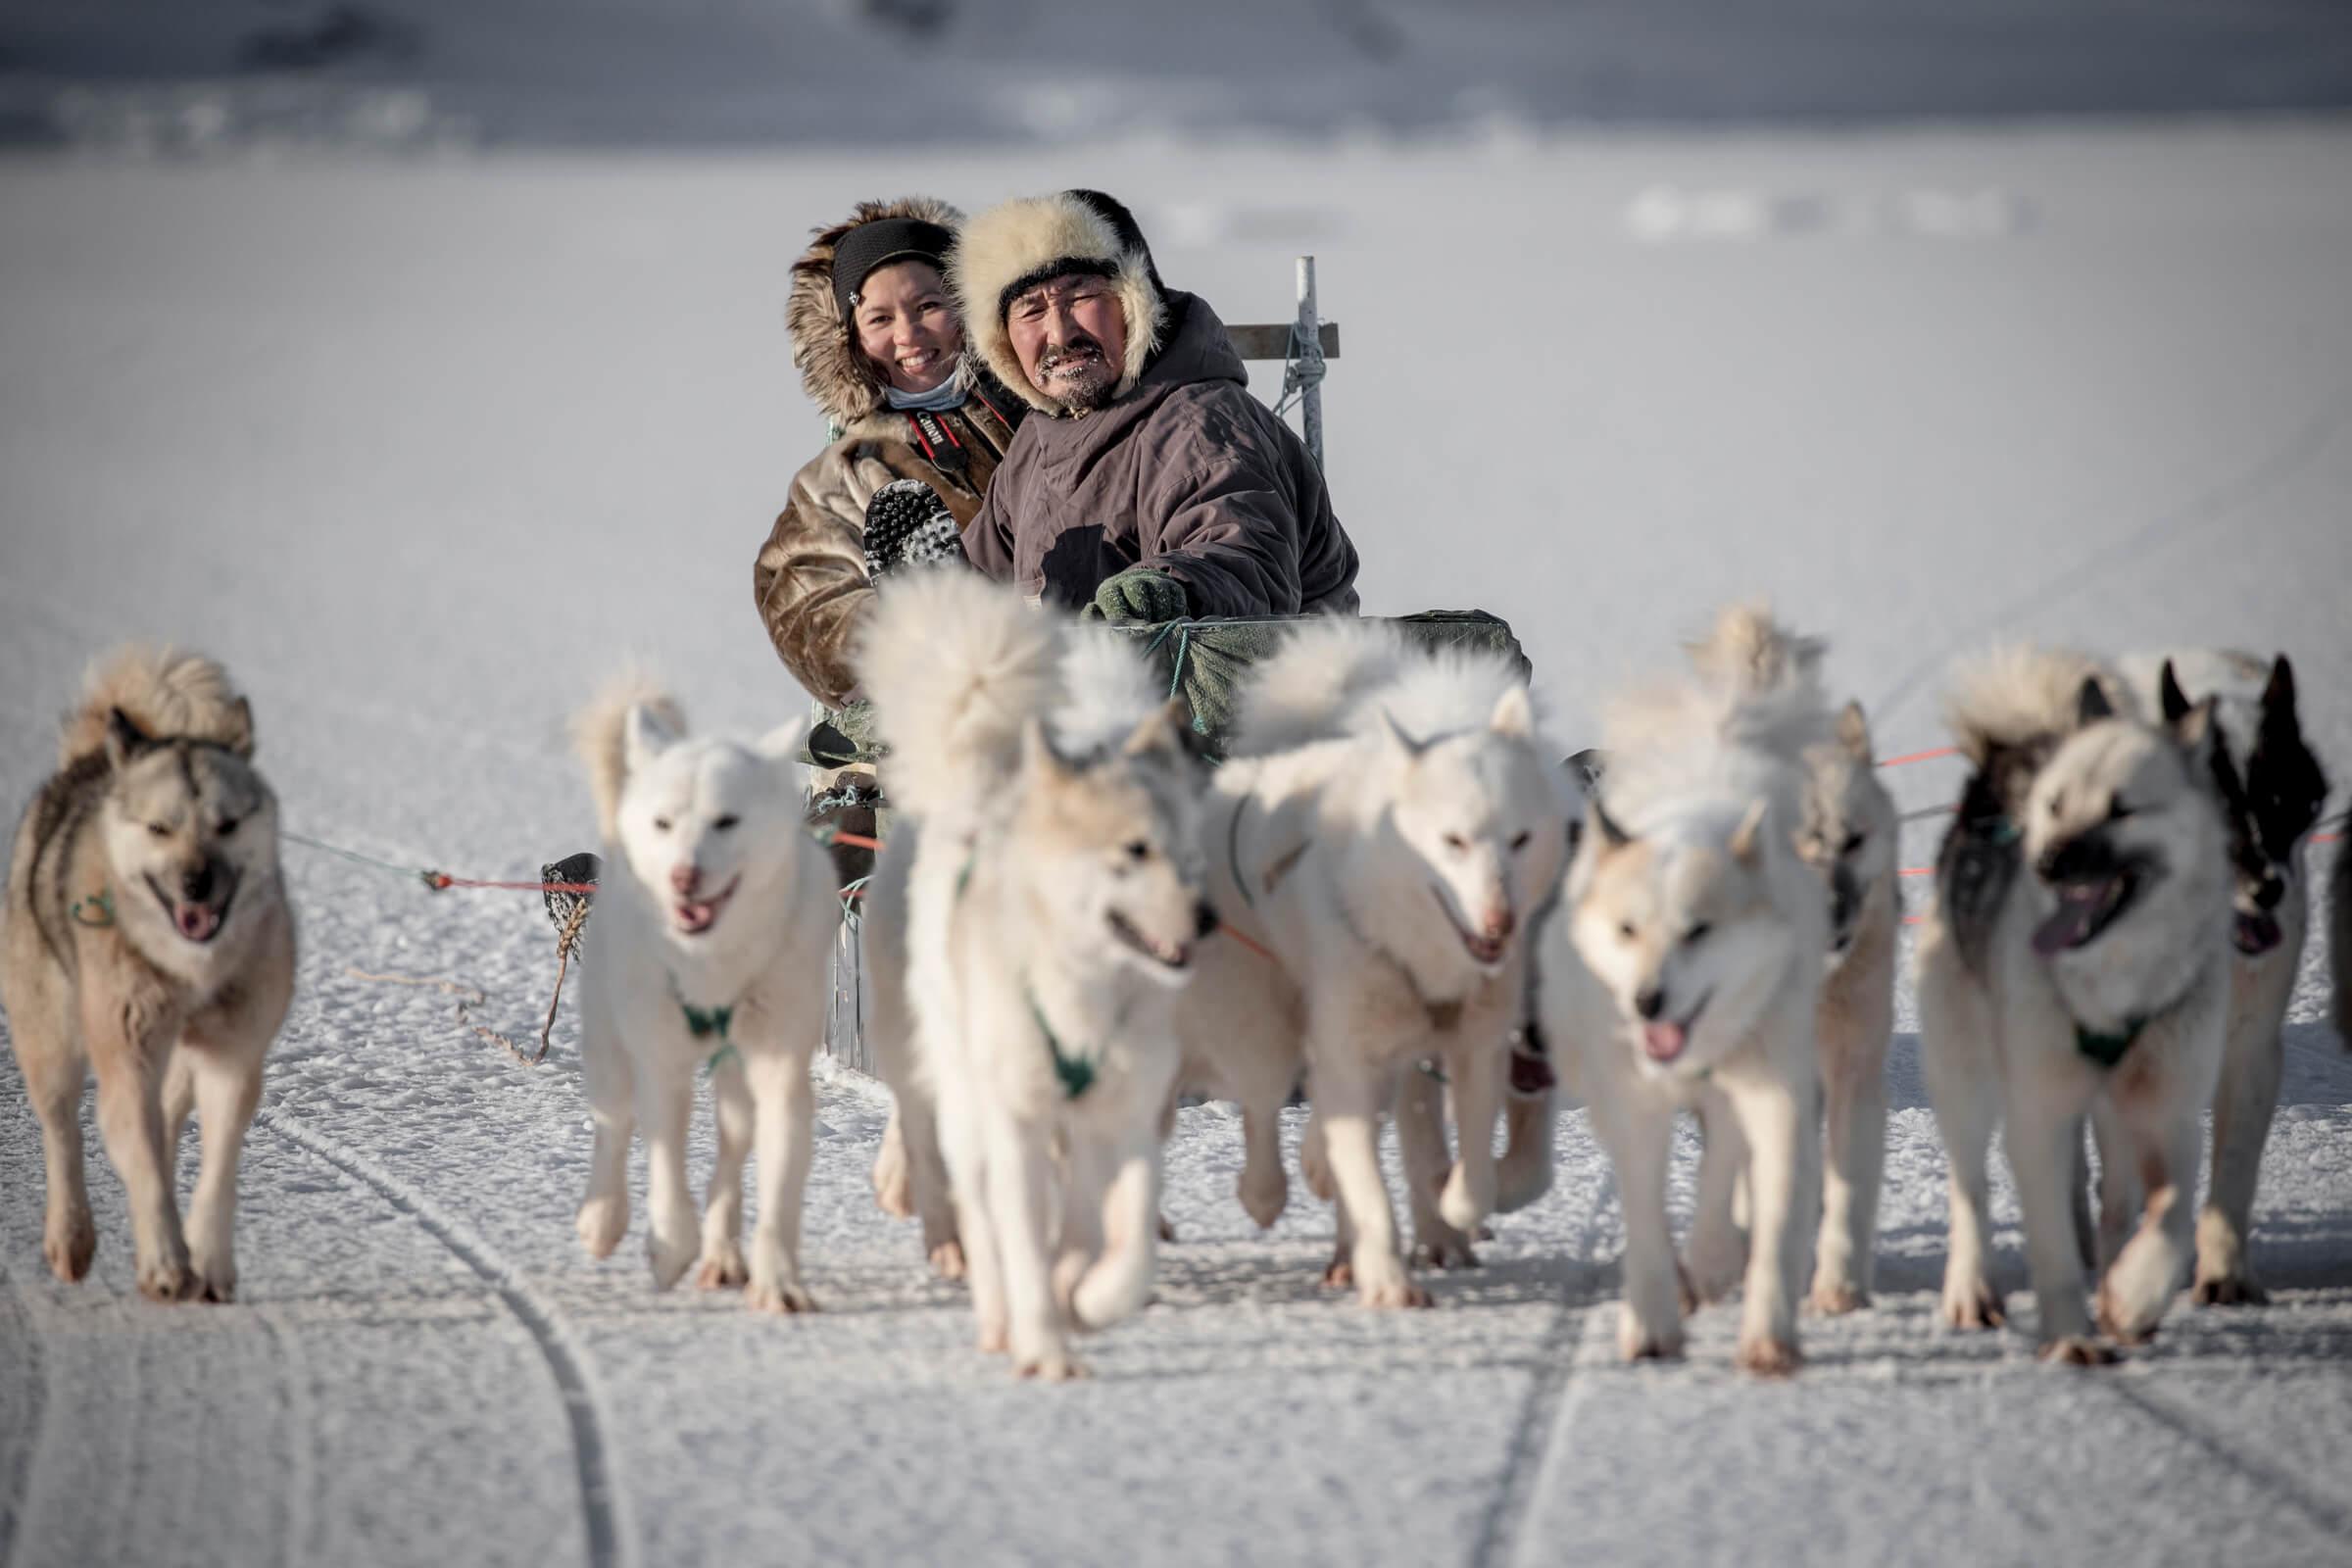 Which type of traveler are you? - [Visit Greenland!]